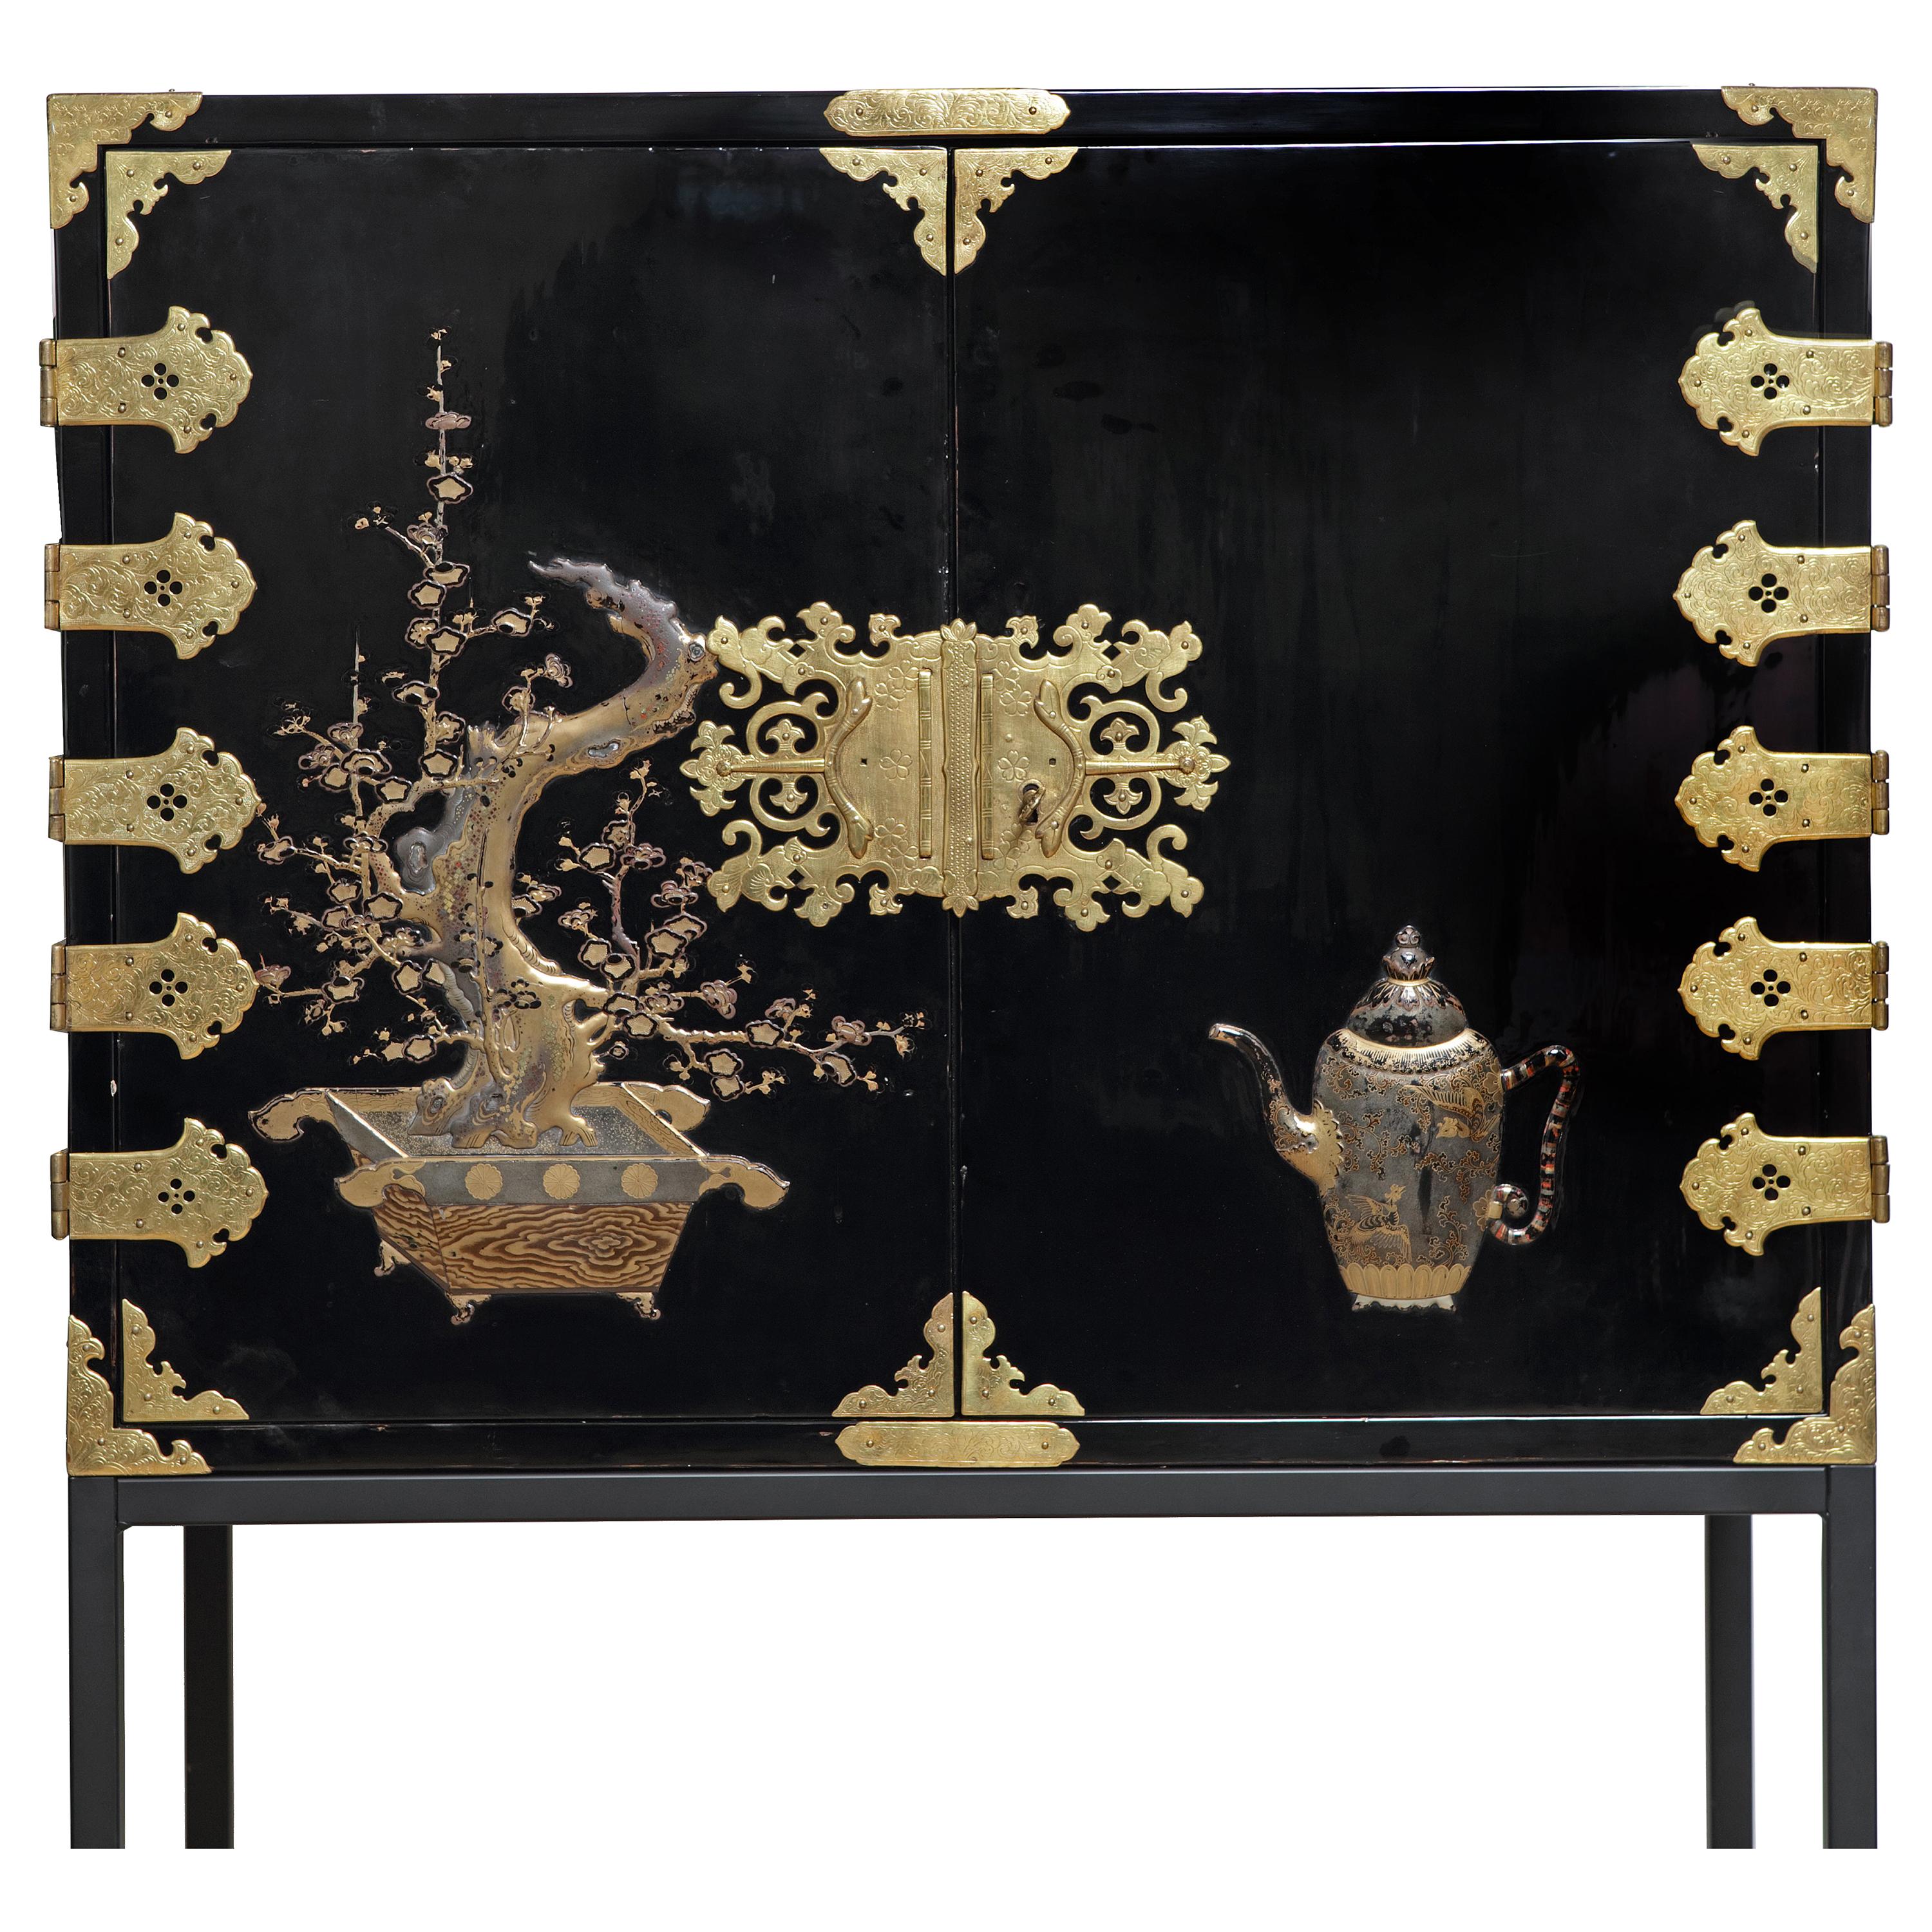 Large 17th Century Japanese Lacquer Cabinet on Modern Powder-Coated Stand